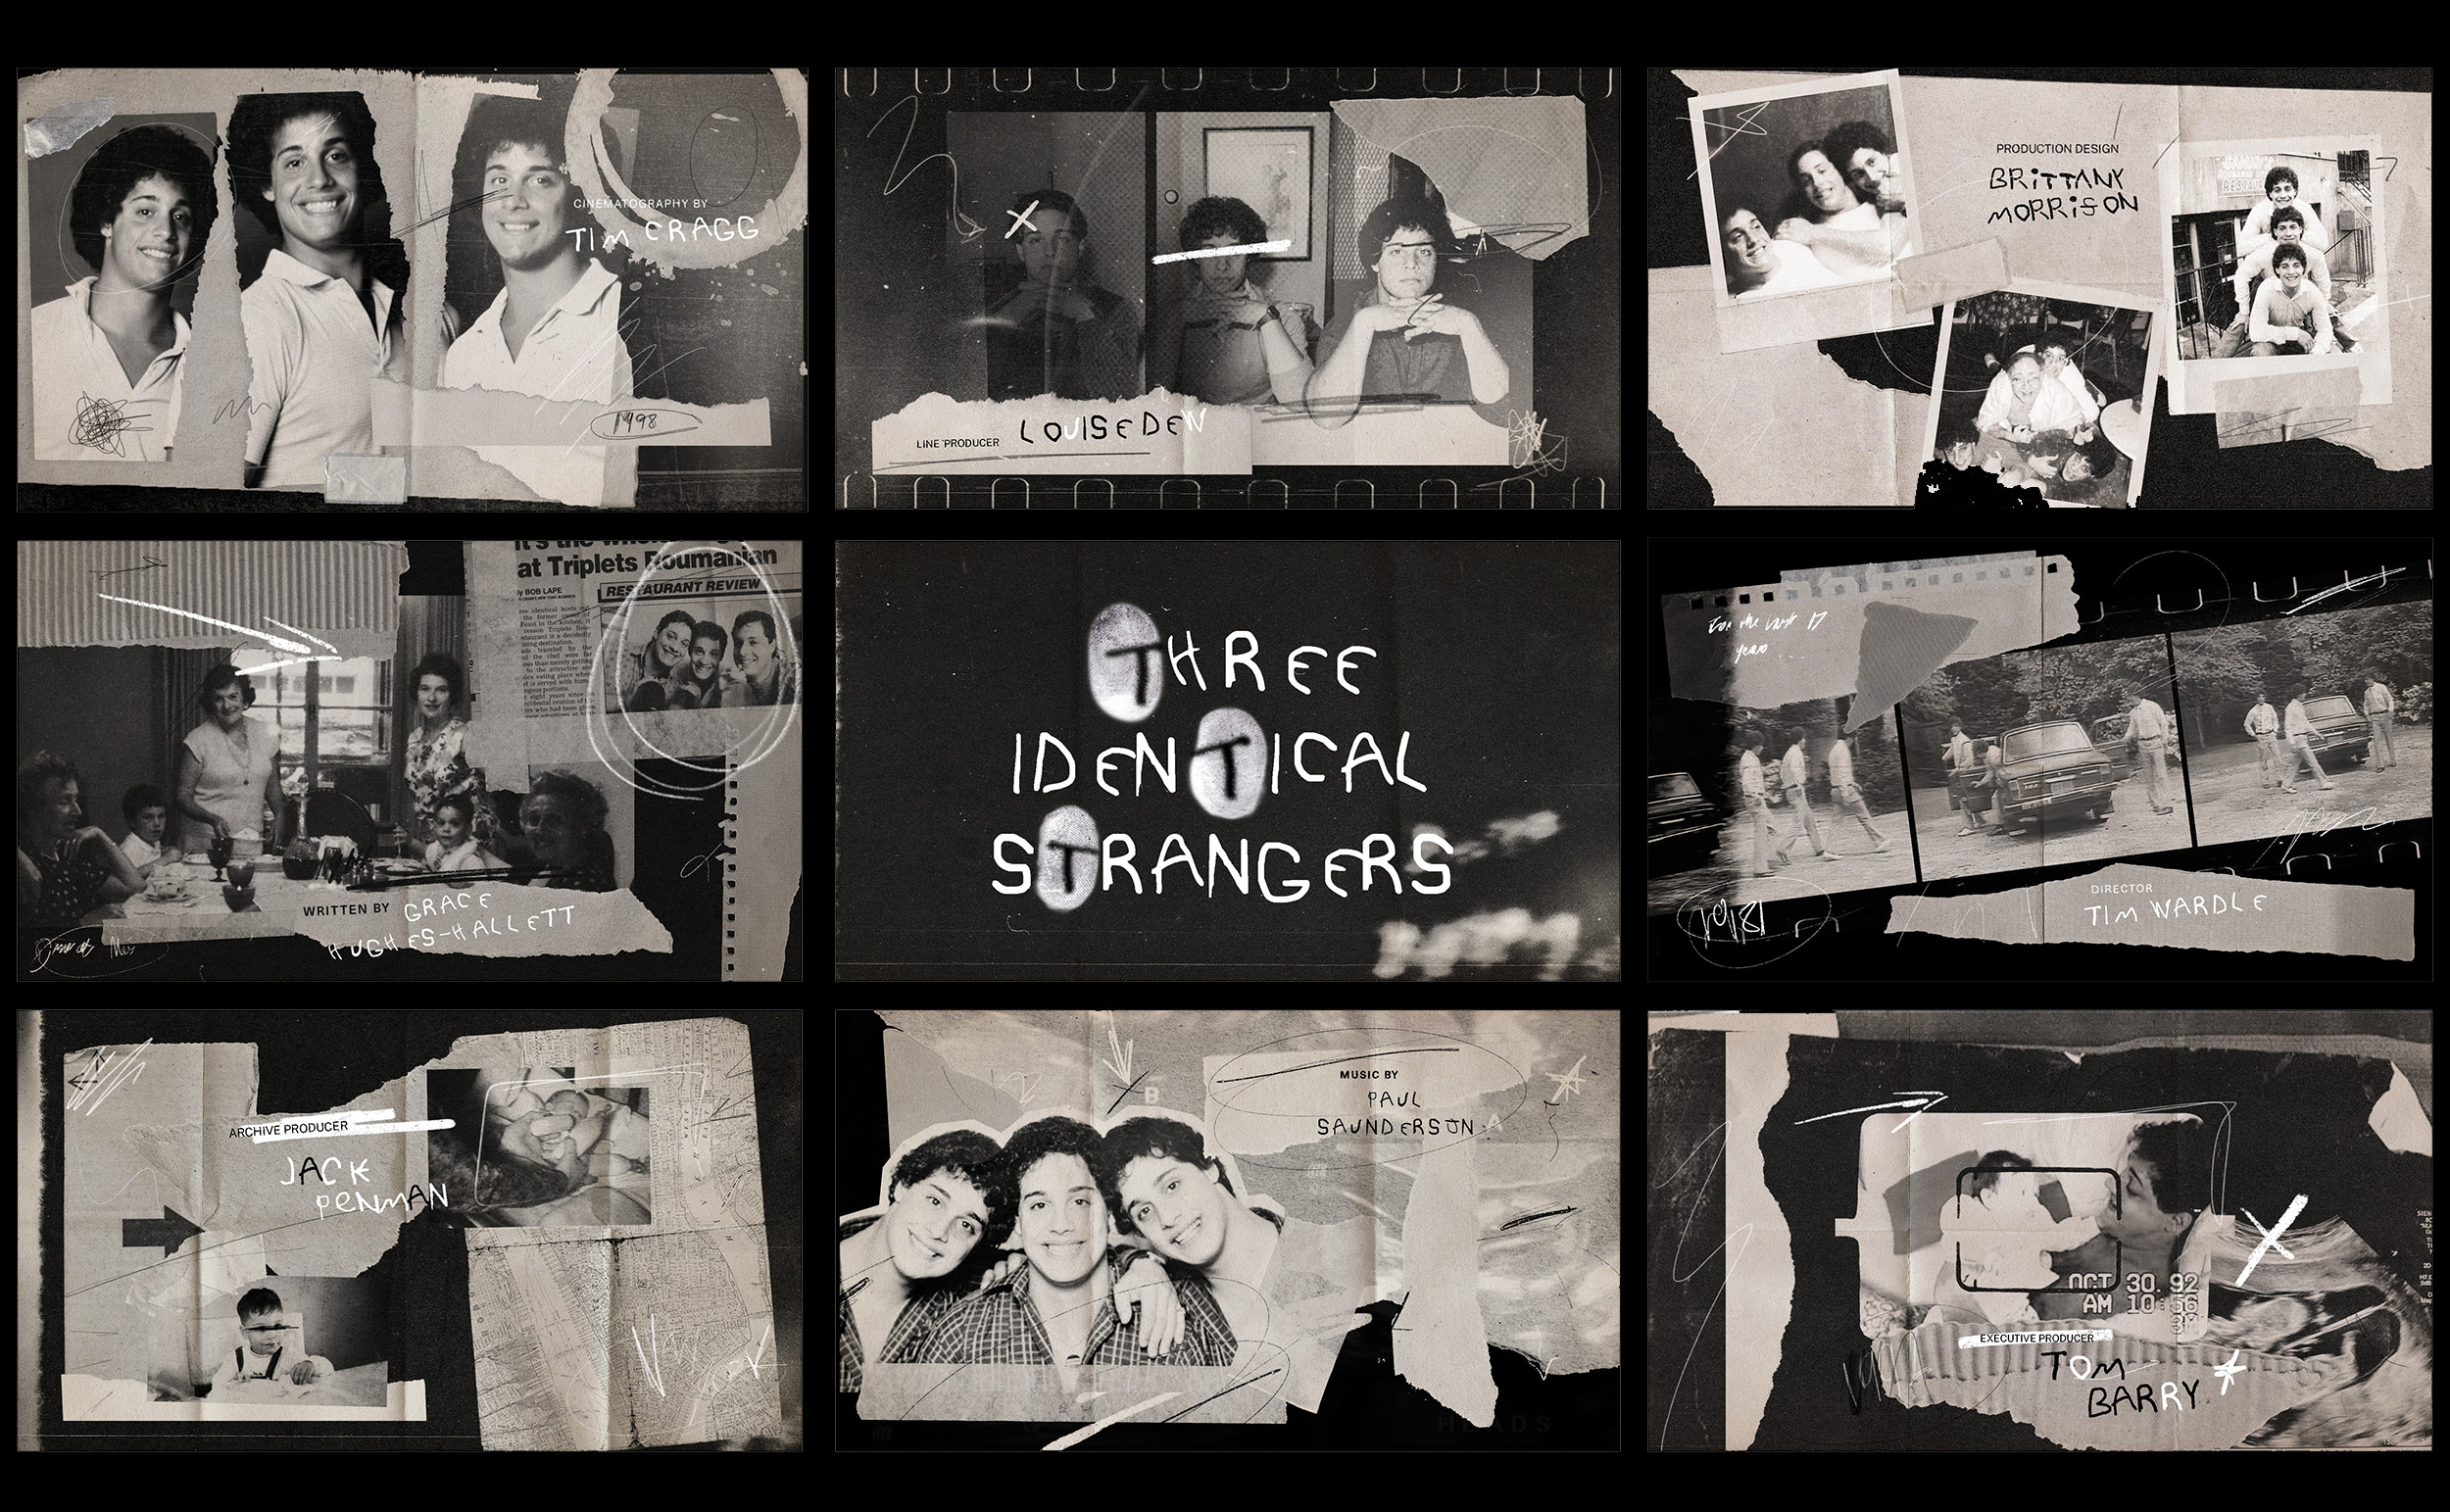 BA Design for Publishing work by Skye Williams showing 9 black and white stills designed for a title sequence of a film, in a scrapbook style.